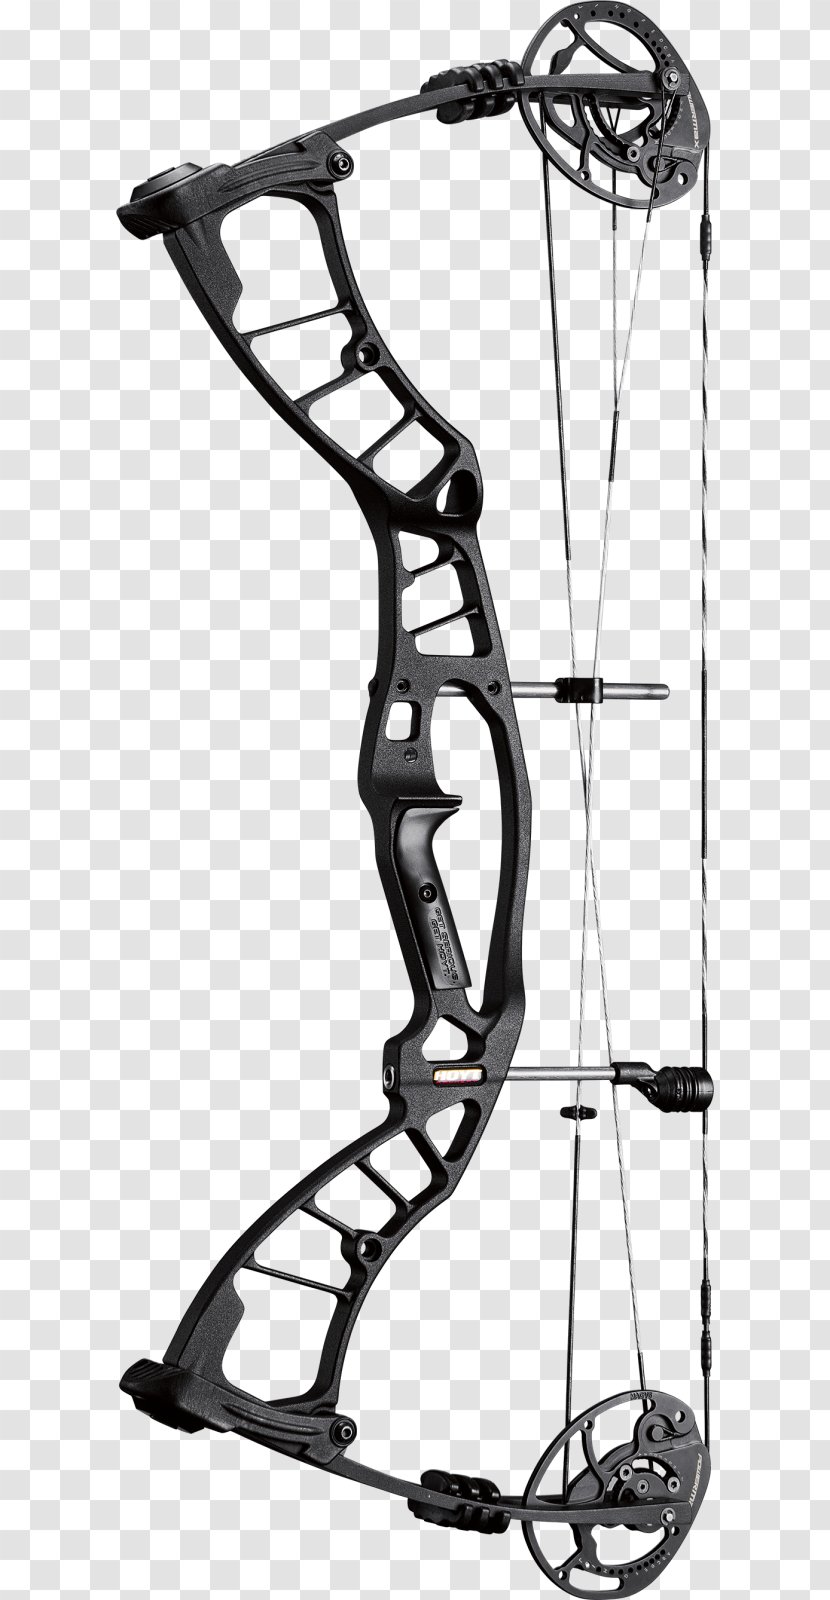 Bowhunting Compound Bows Archery Bow And Arrow - Benson - Package Transparent PNG